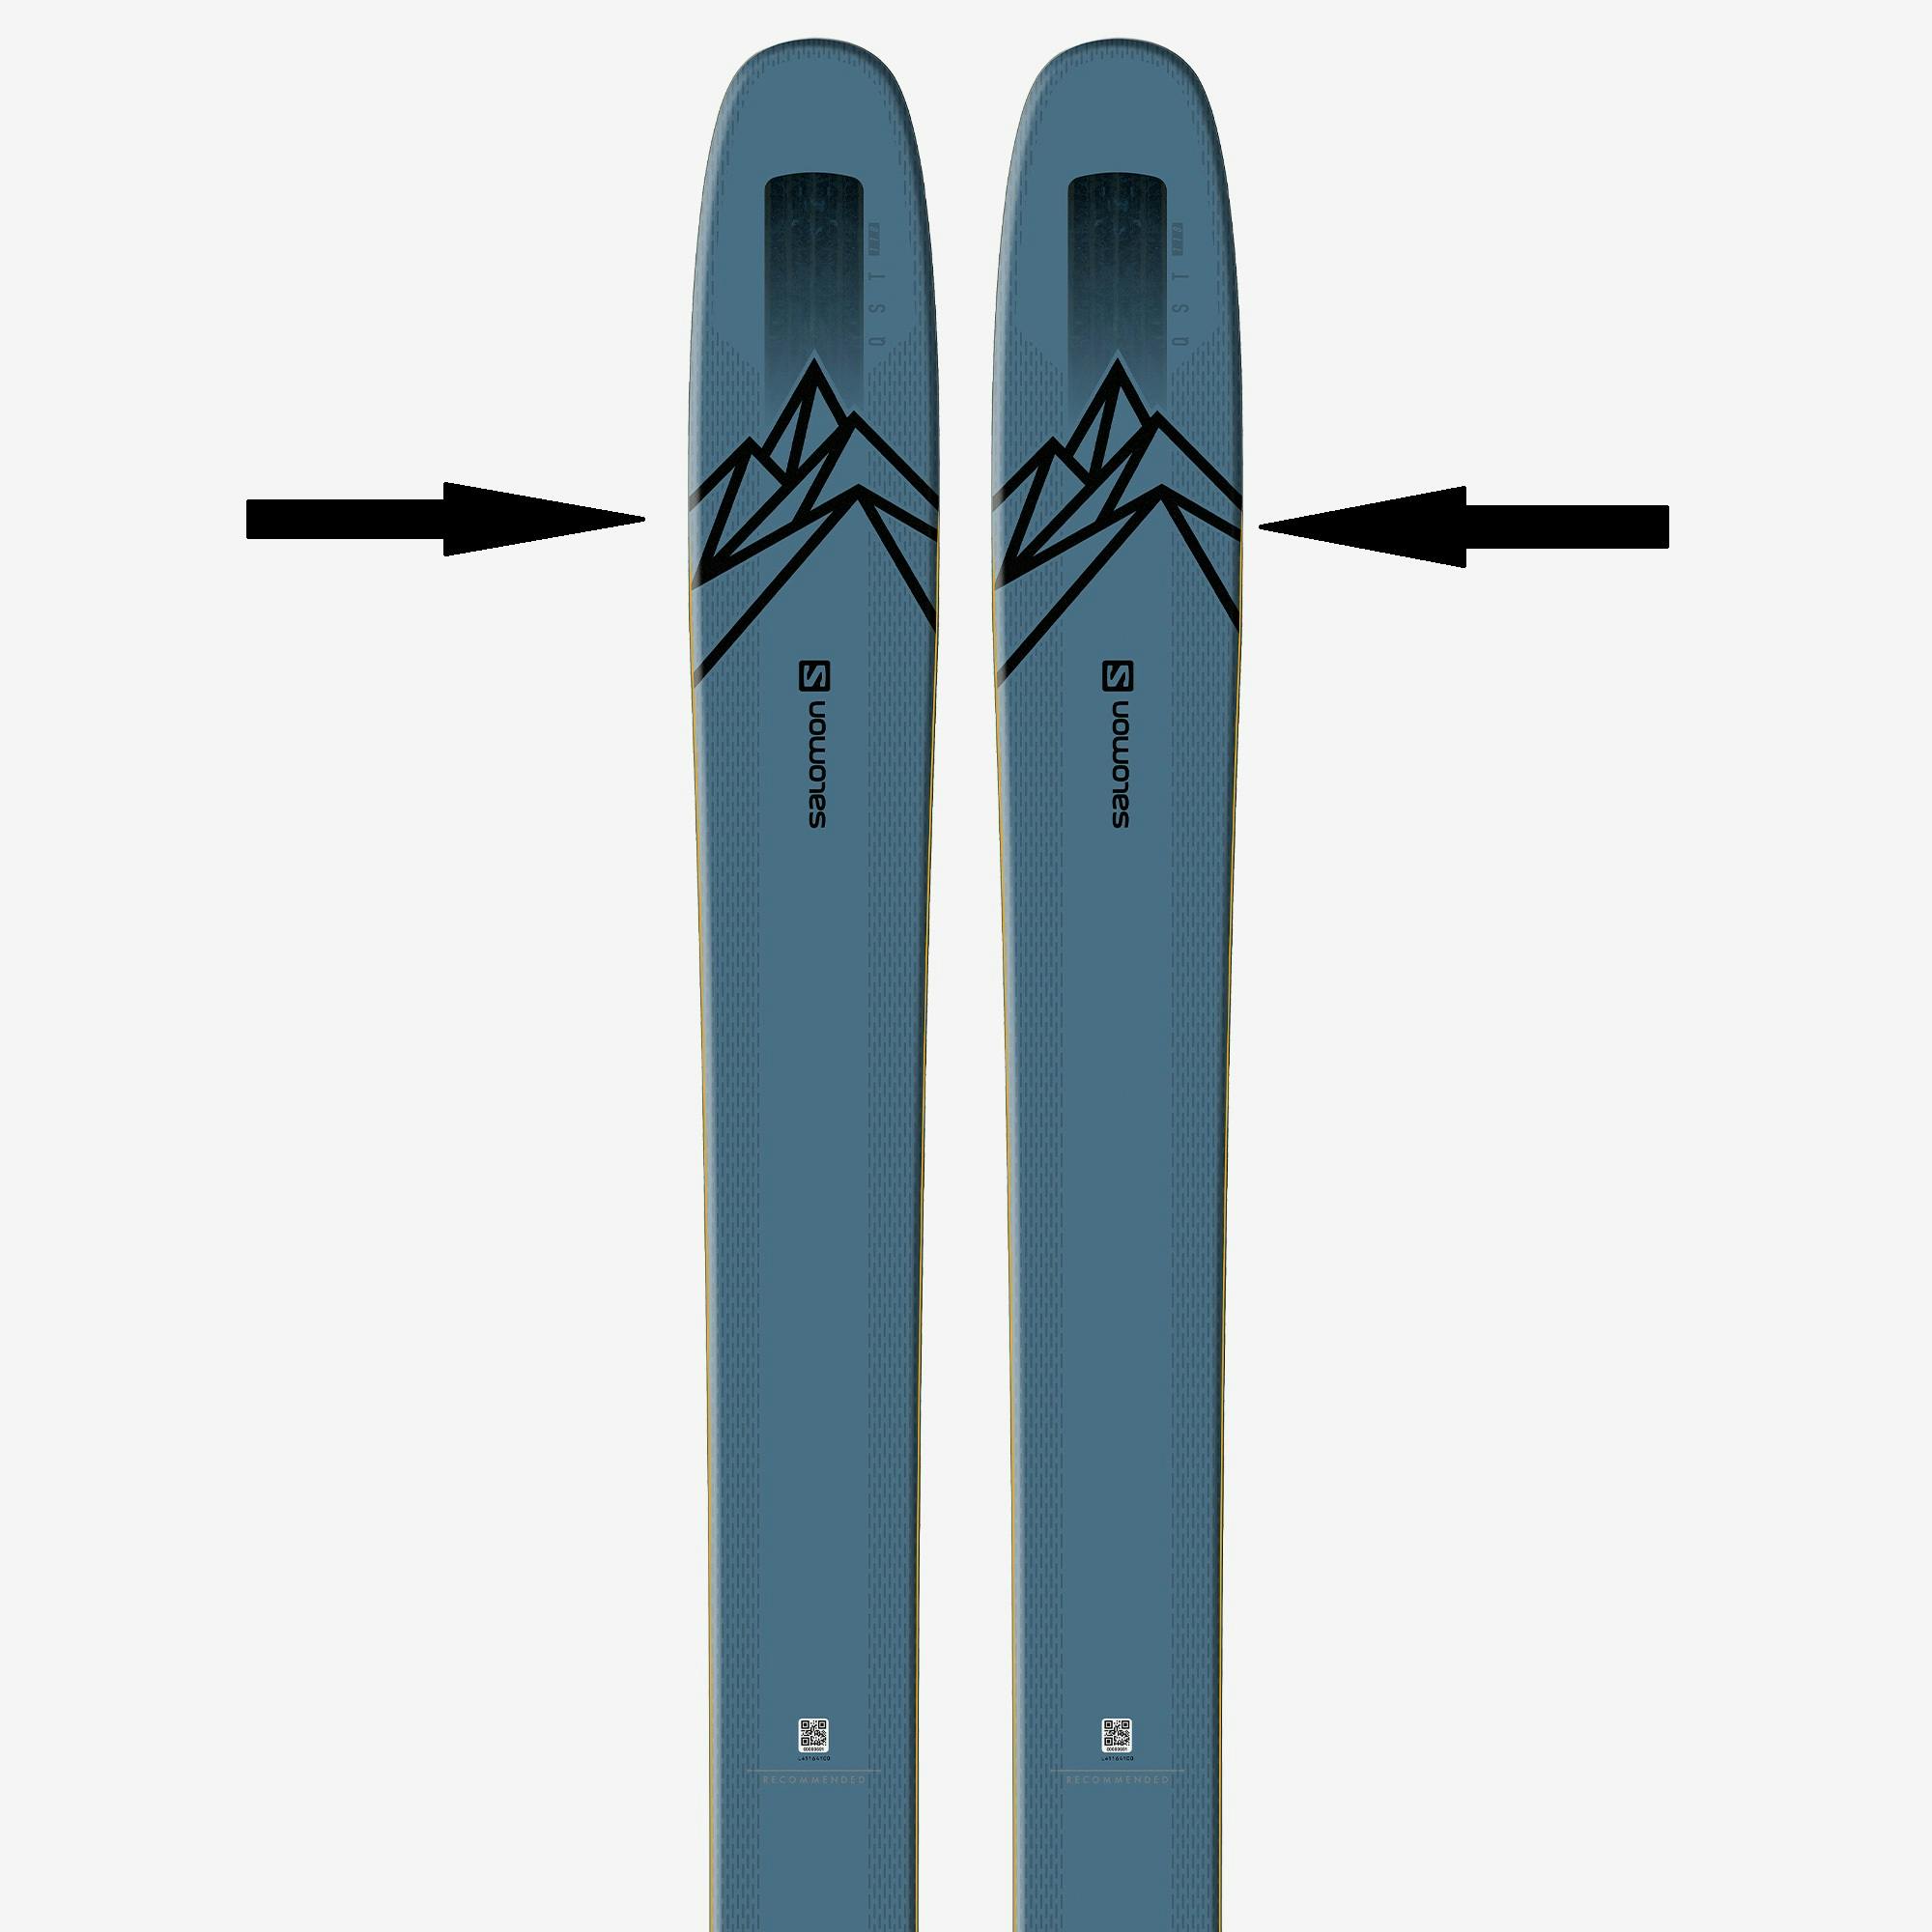 Arrows pointing out tip taper, the widest point of the ski, on a pair of skis